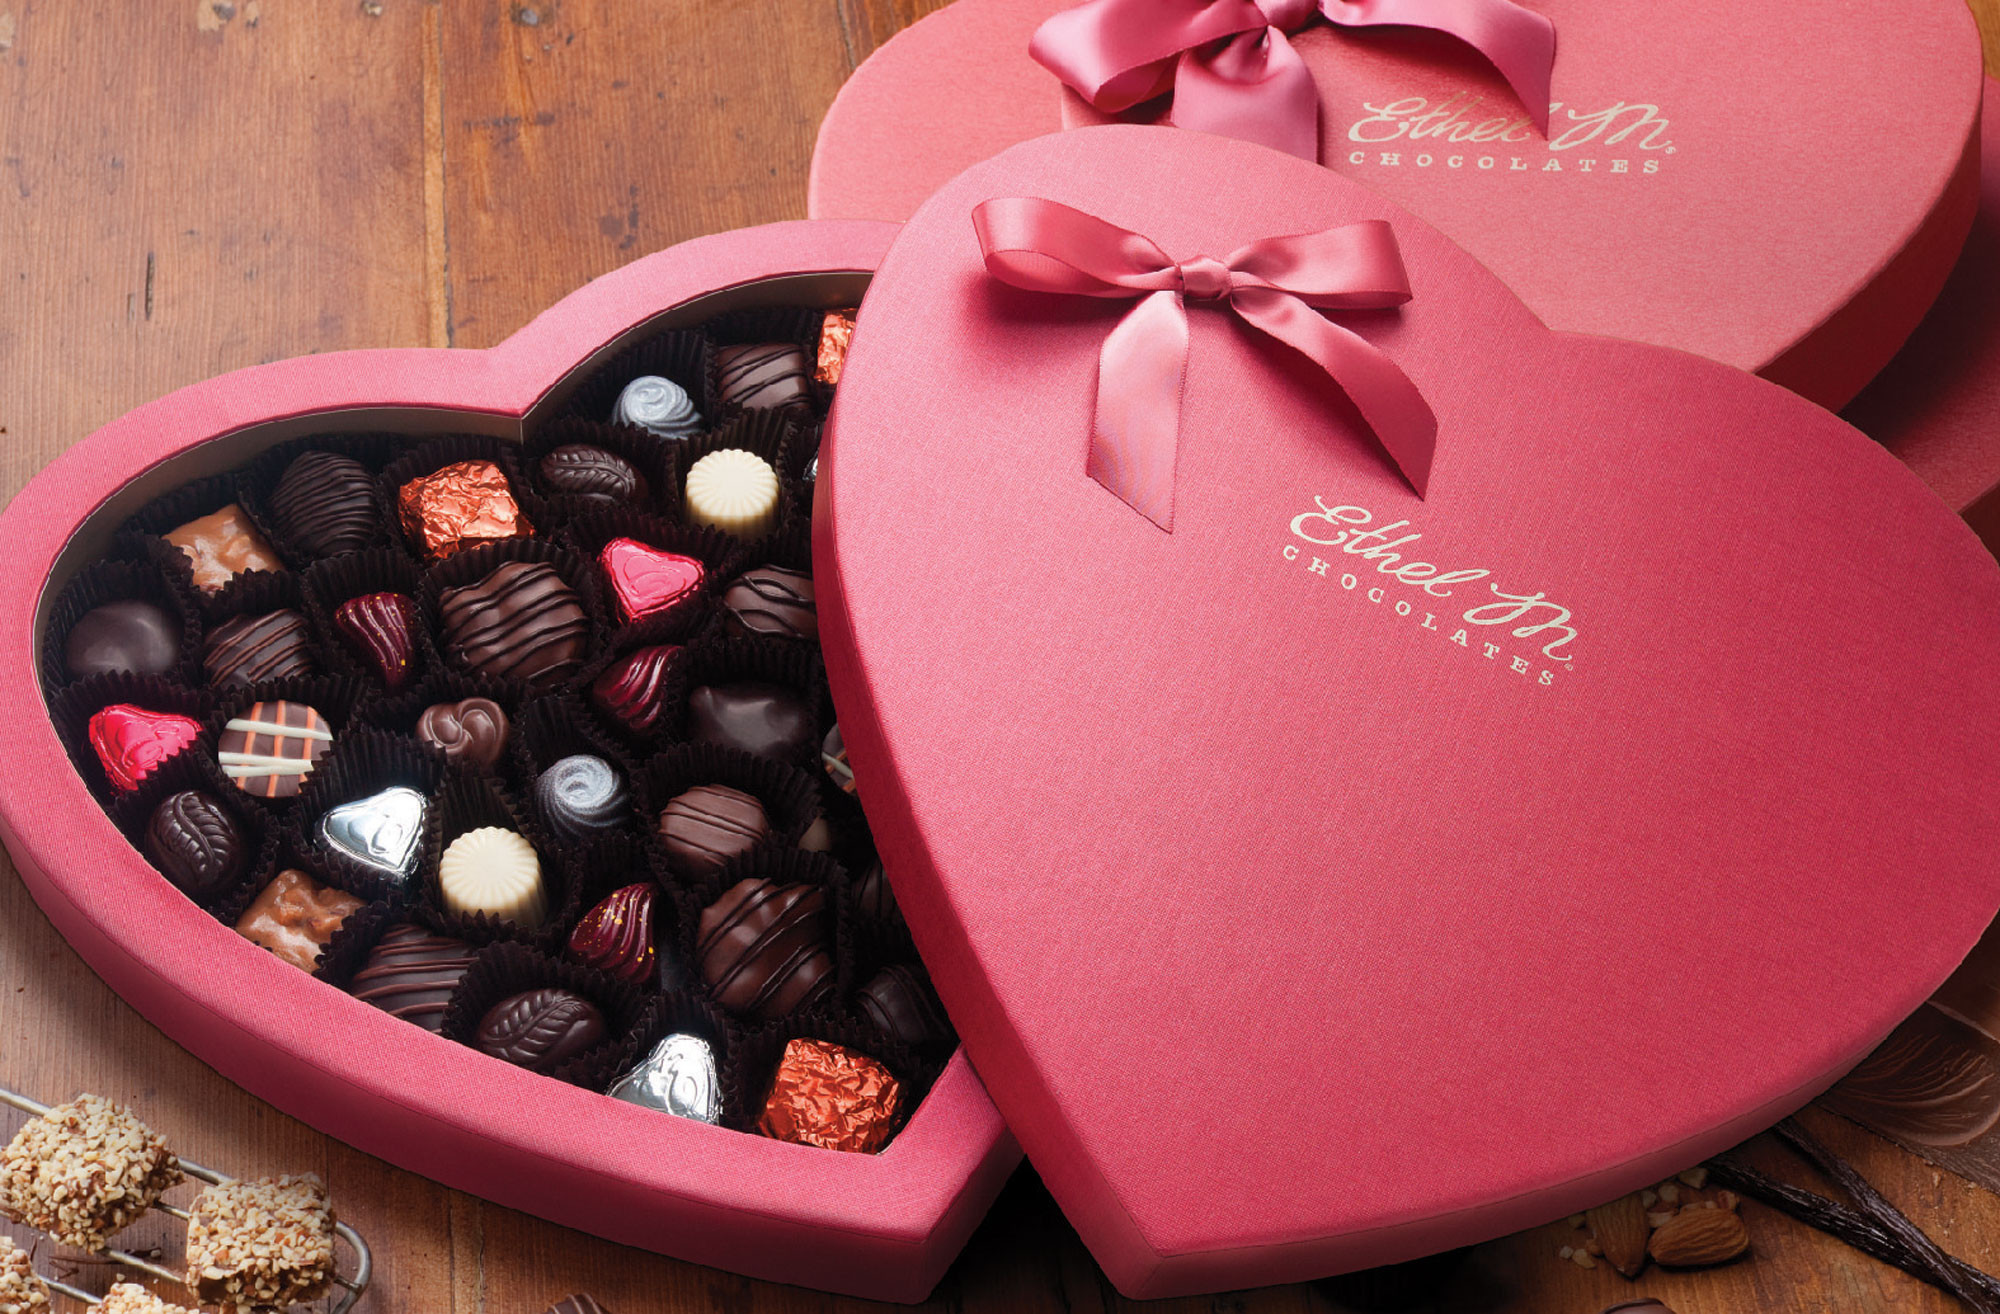 Valentines Day Candy Gift Ideas
 12 Best Valentines Gift Ideas For Her in This 2016